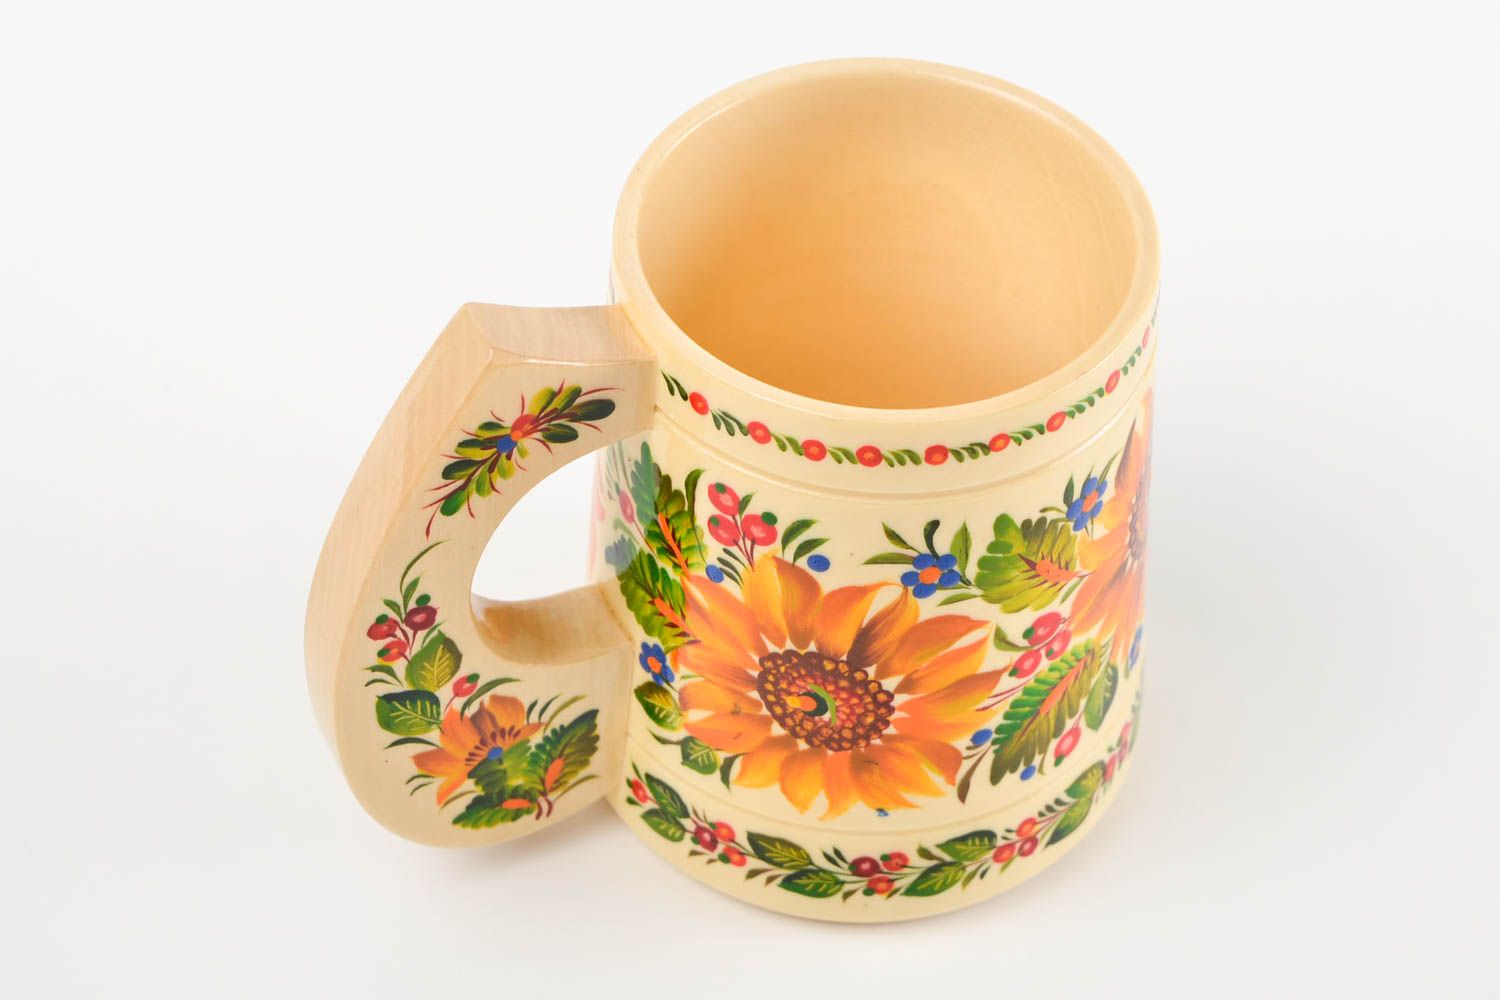 Handmade mug designer wooden cup decorative use only gift ideas home decor photo 4